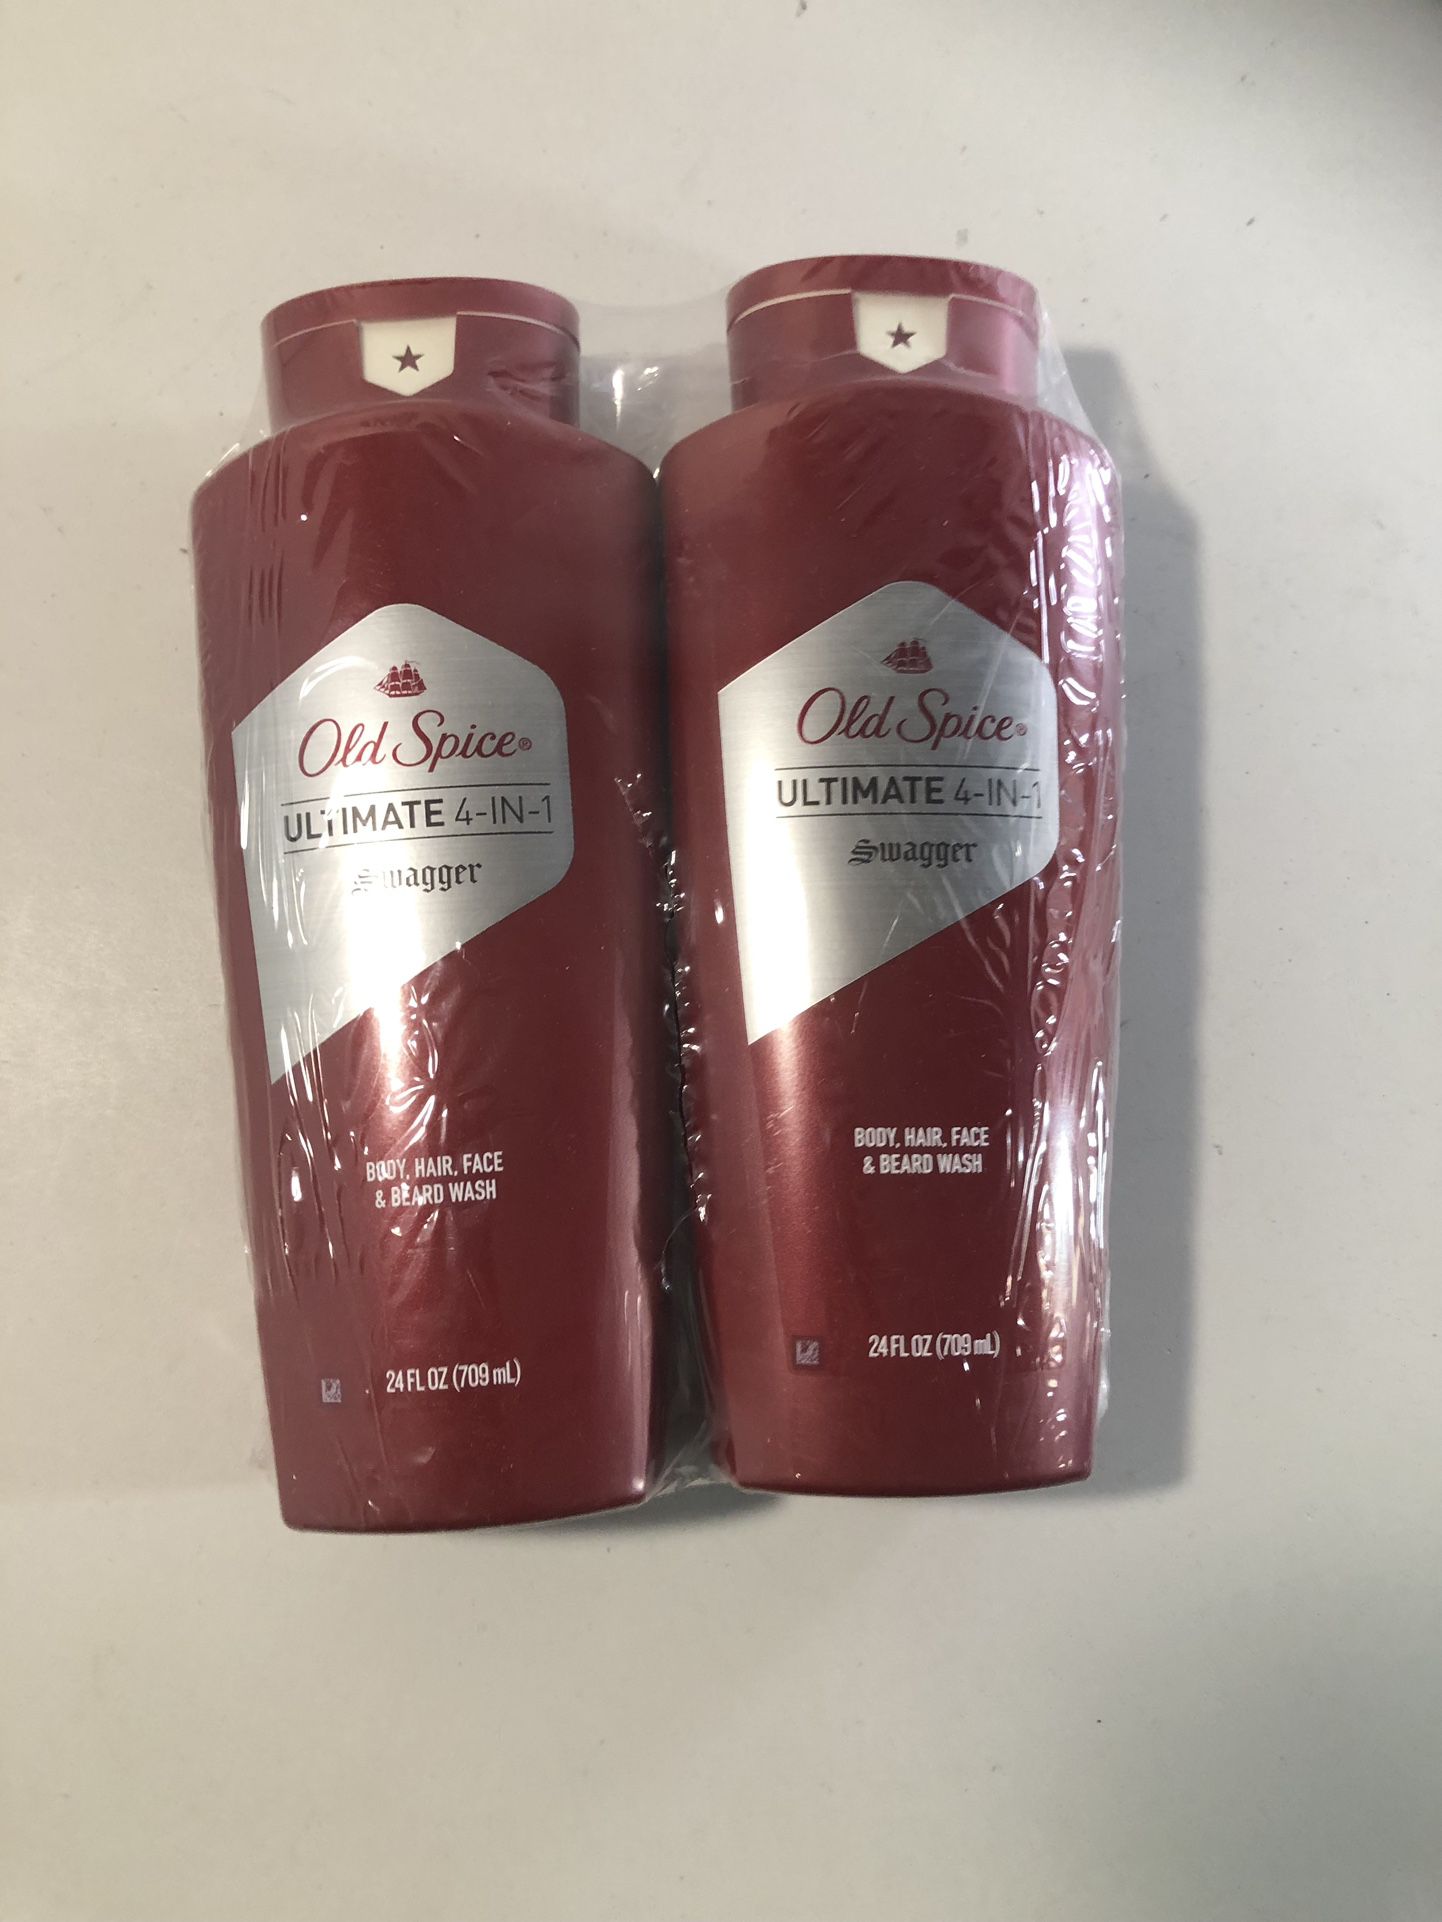 Old Spice Ultmate 4in 1 Body,Hair,Face & Beard Wash 2 pack  24oz